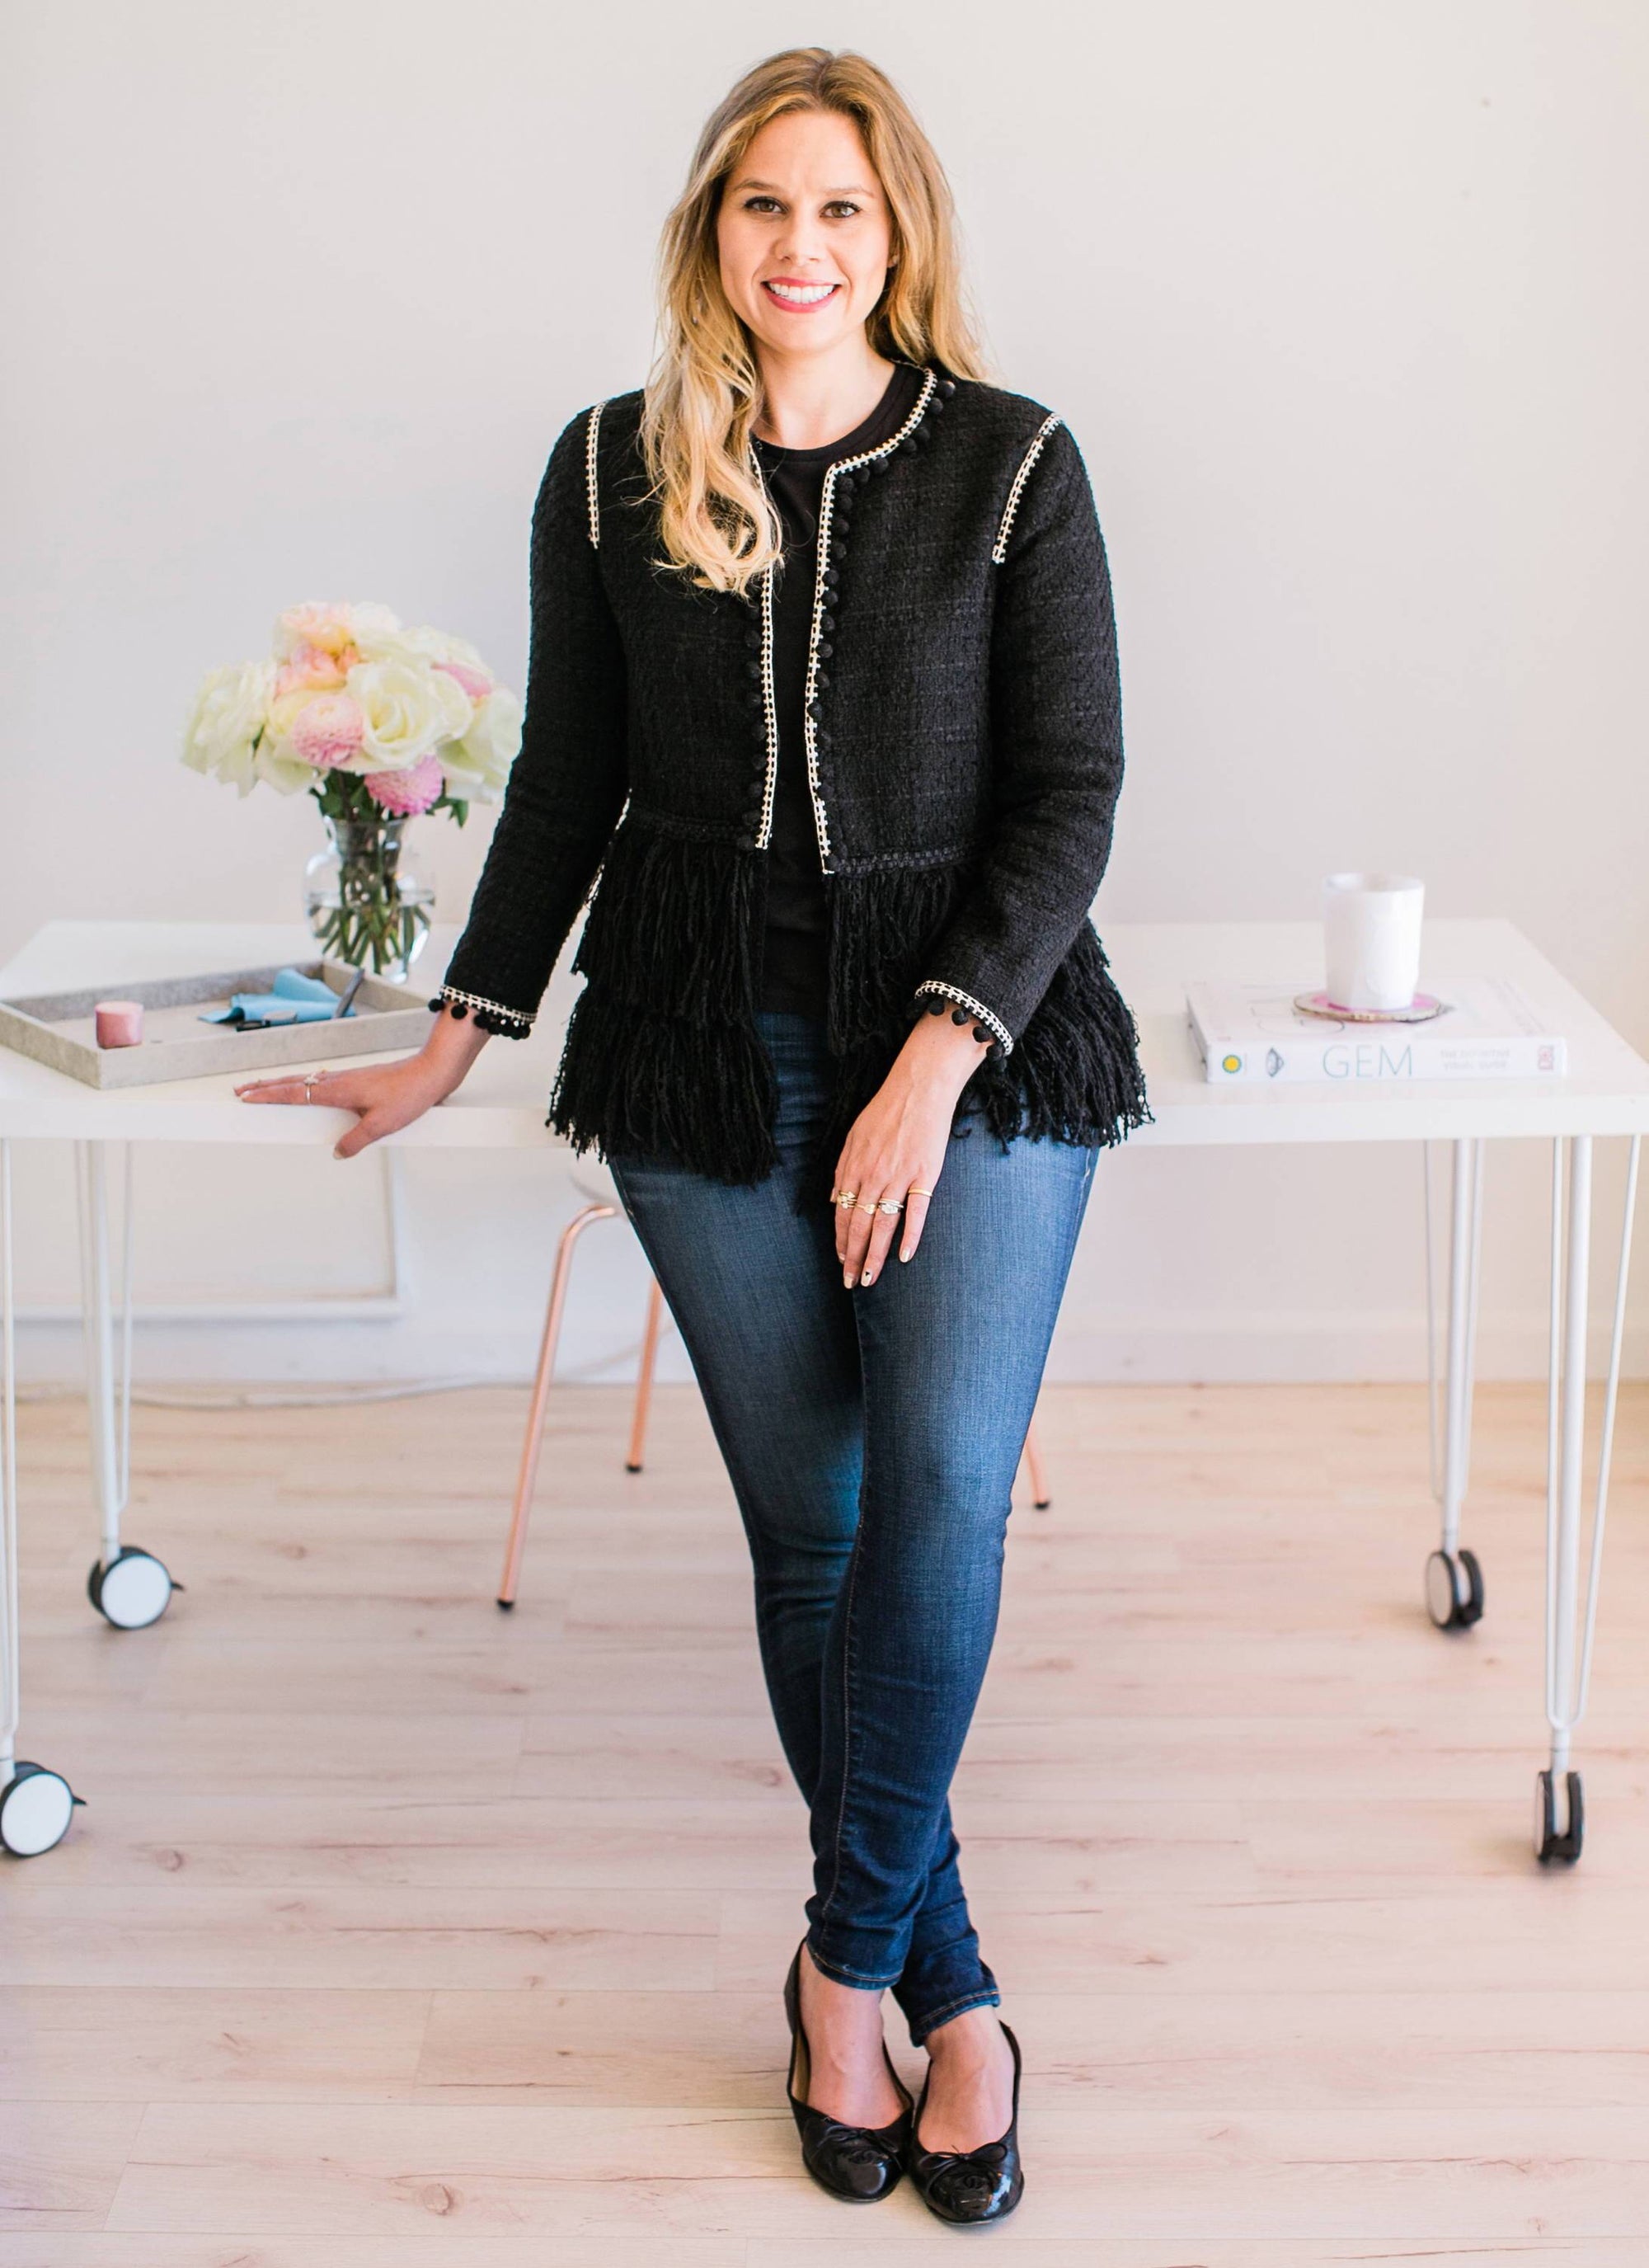 Q & A with Gem Breakfast Founder, Catherine Cason